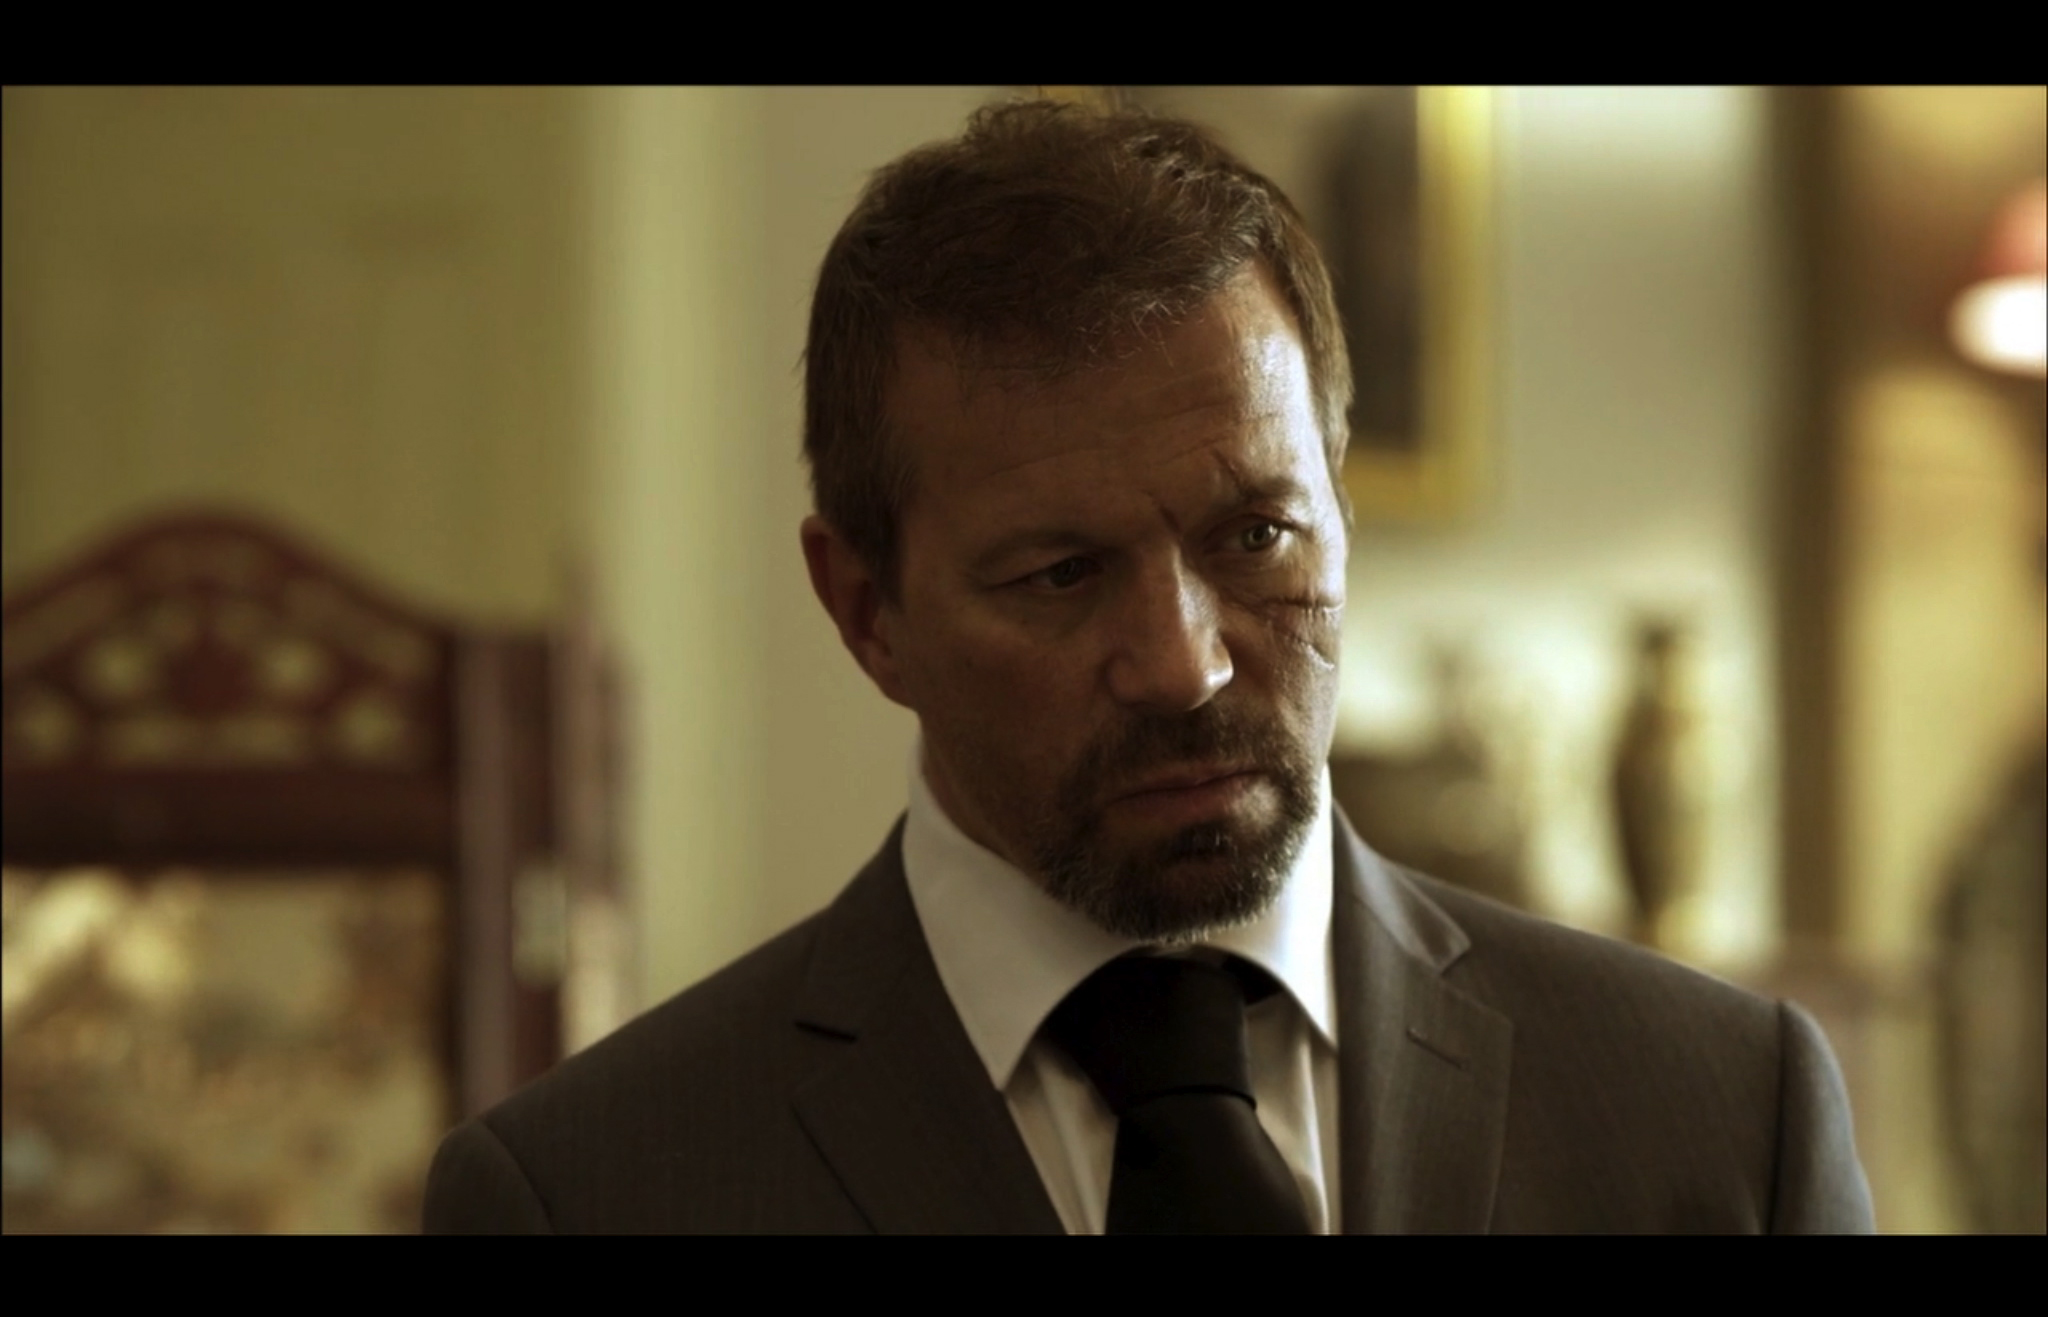 Ron Balicki in the role of Polanski in the Movie, A Good Man.